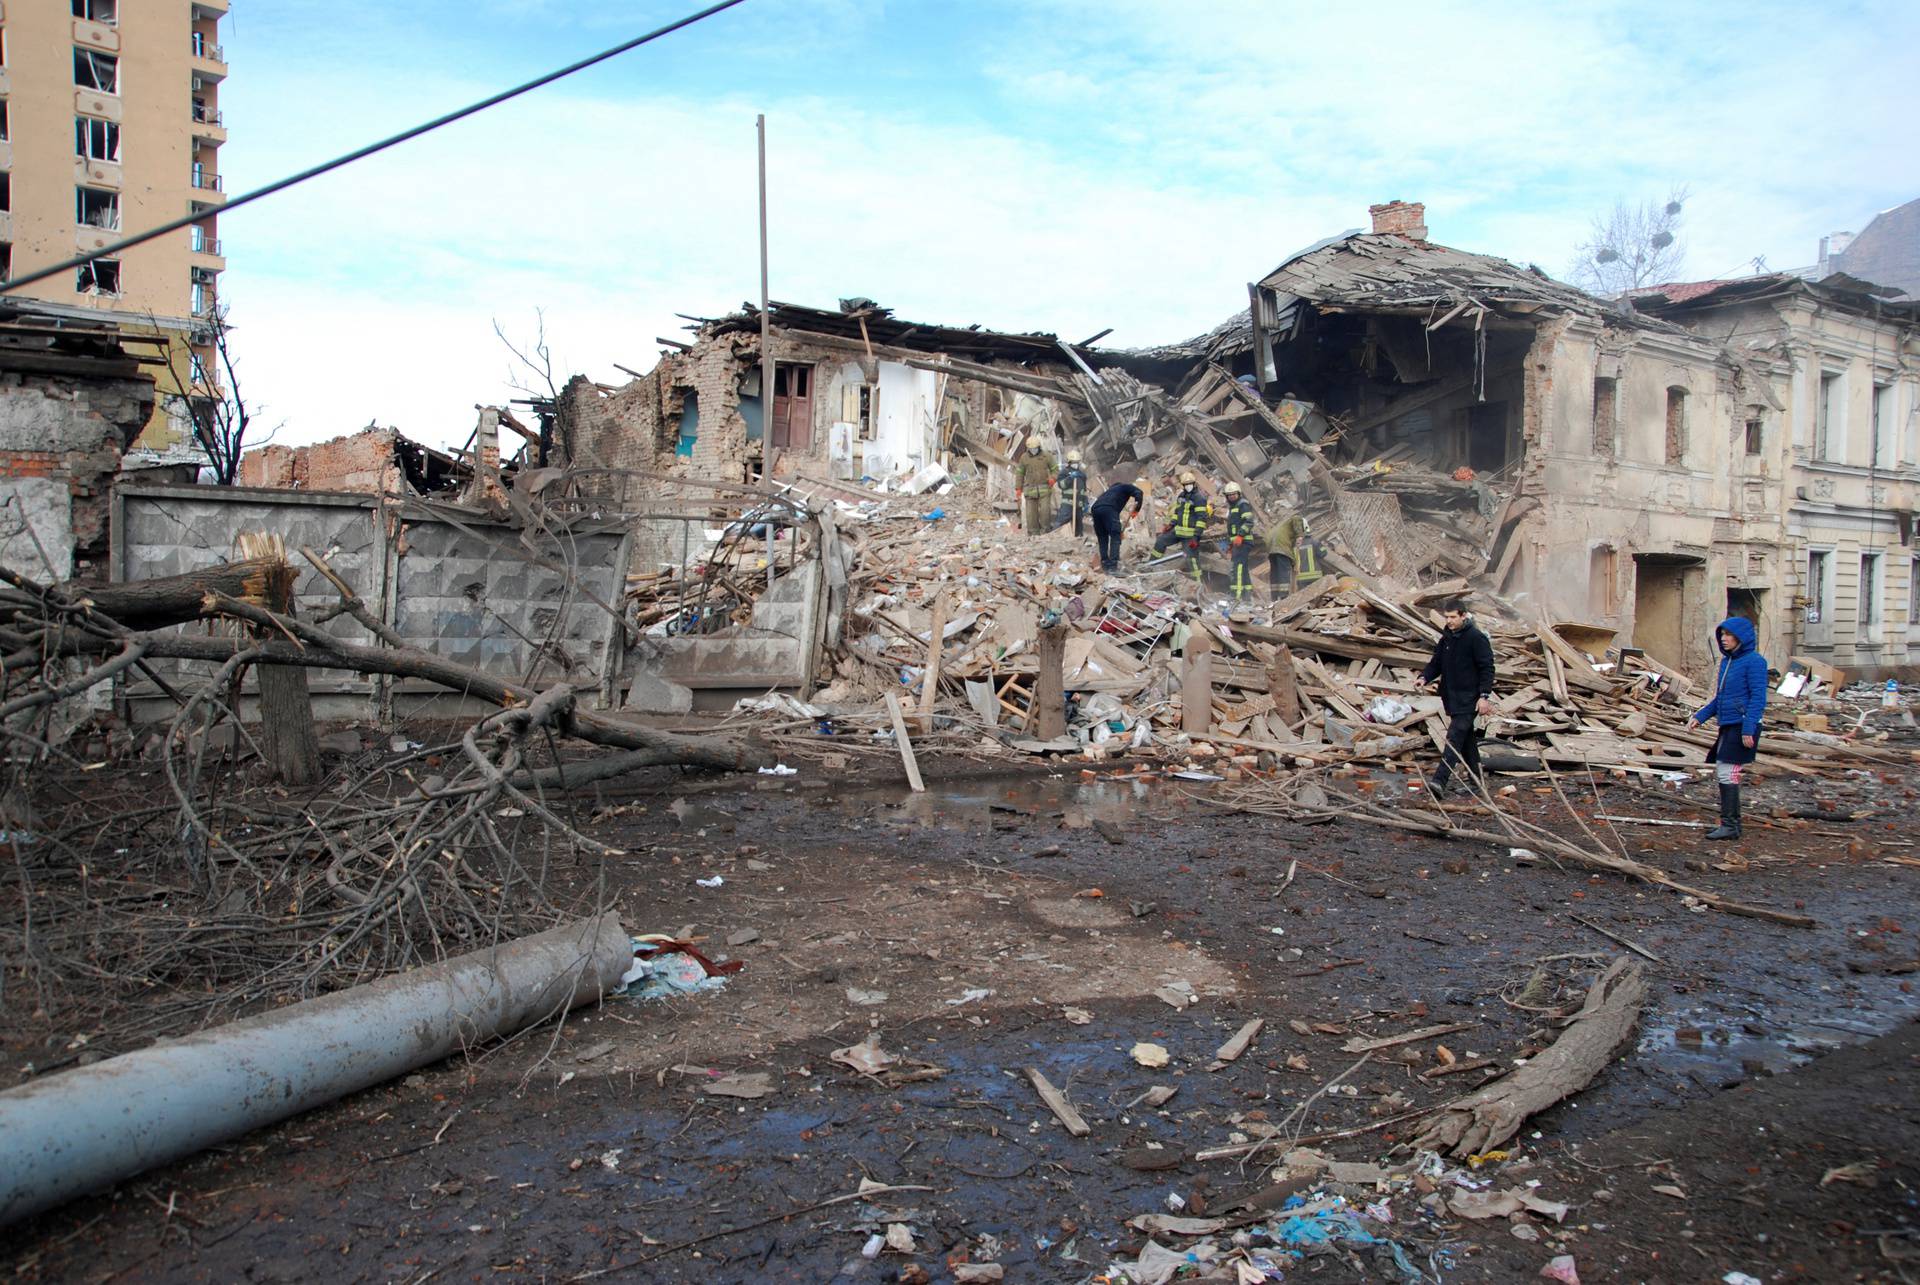 A view shows buildings damaged by recent shelling during Russia's invasion of Ukraine in Kharkiv